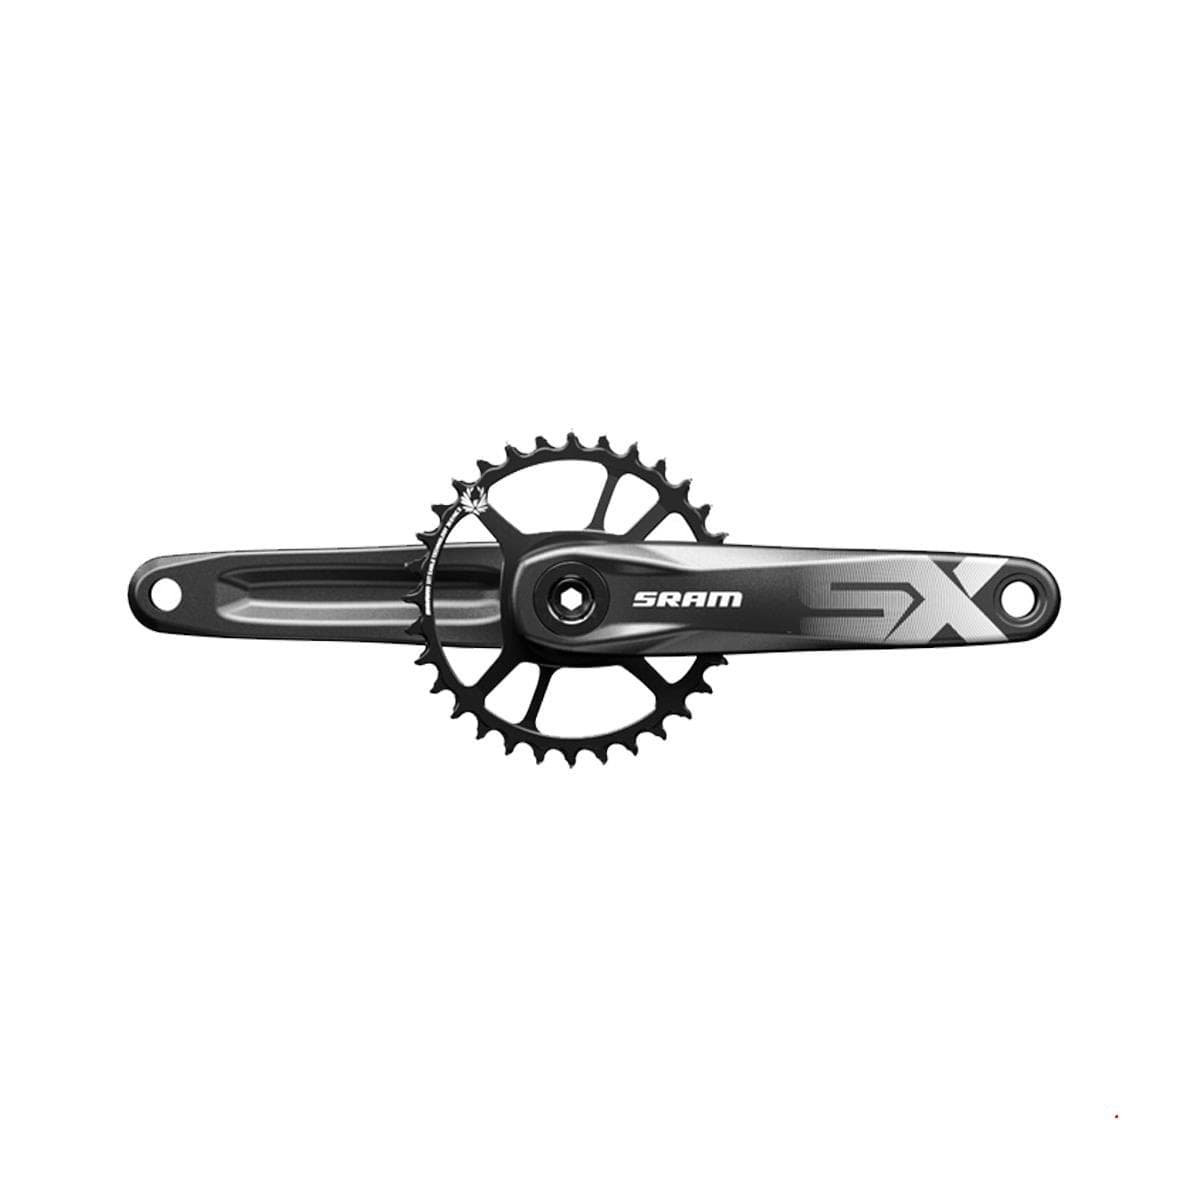 Sram Crankset Sx Eagle Boost 148 Dub 12S With Direct Mount 32T X-Sync 2 Steel Chainring A1: Black 175Mm